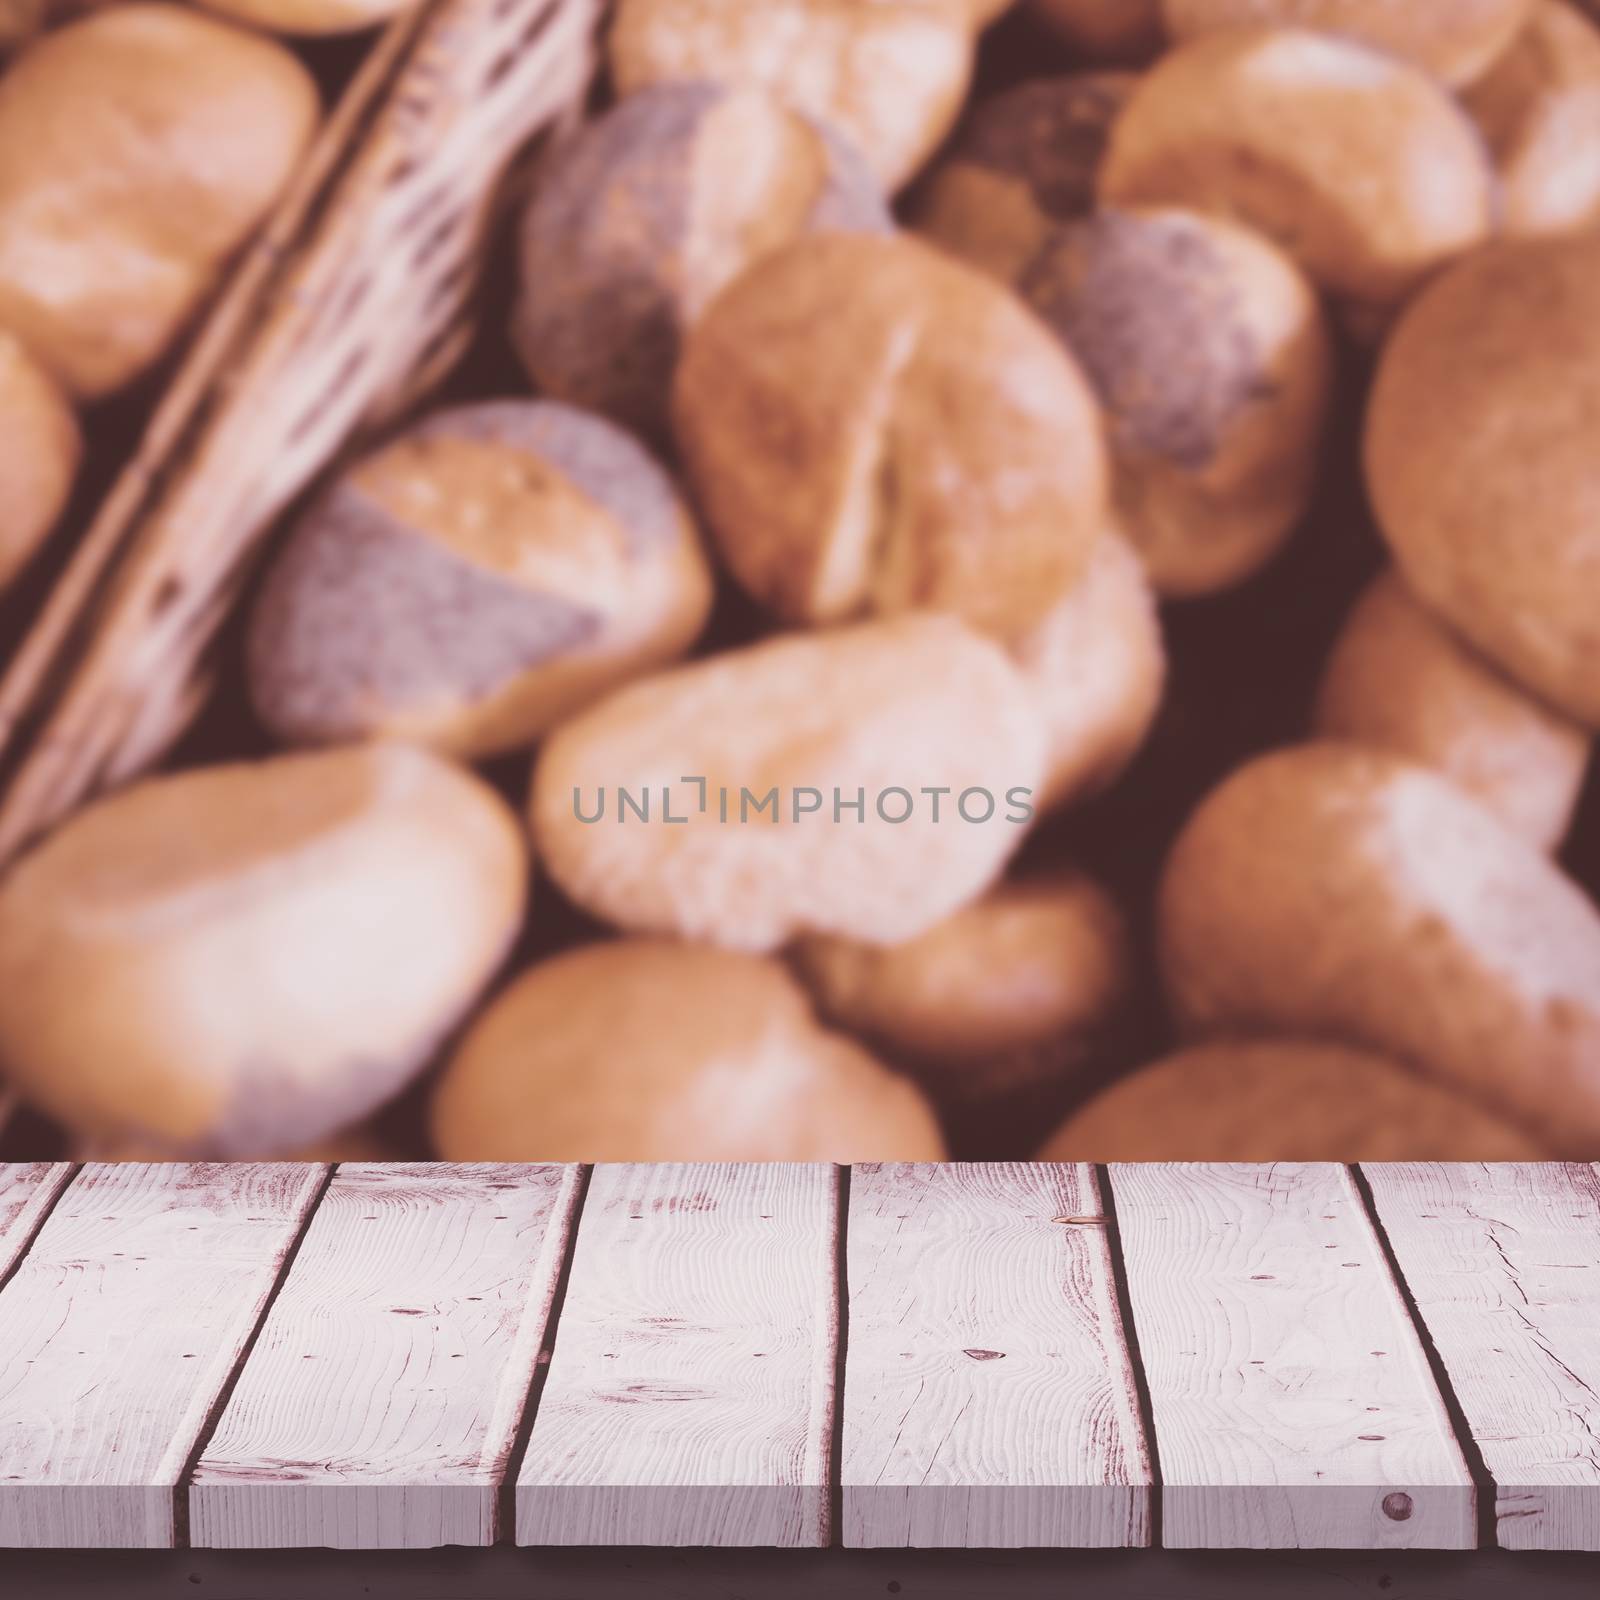 Wooden table against  close up of basket with fresh bread